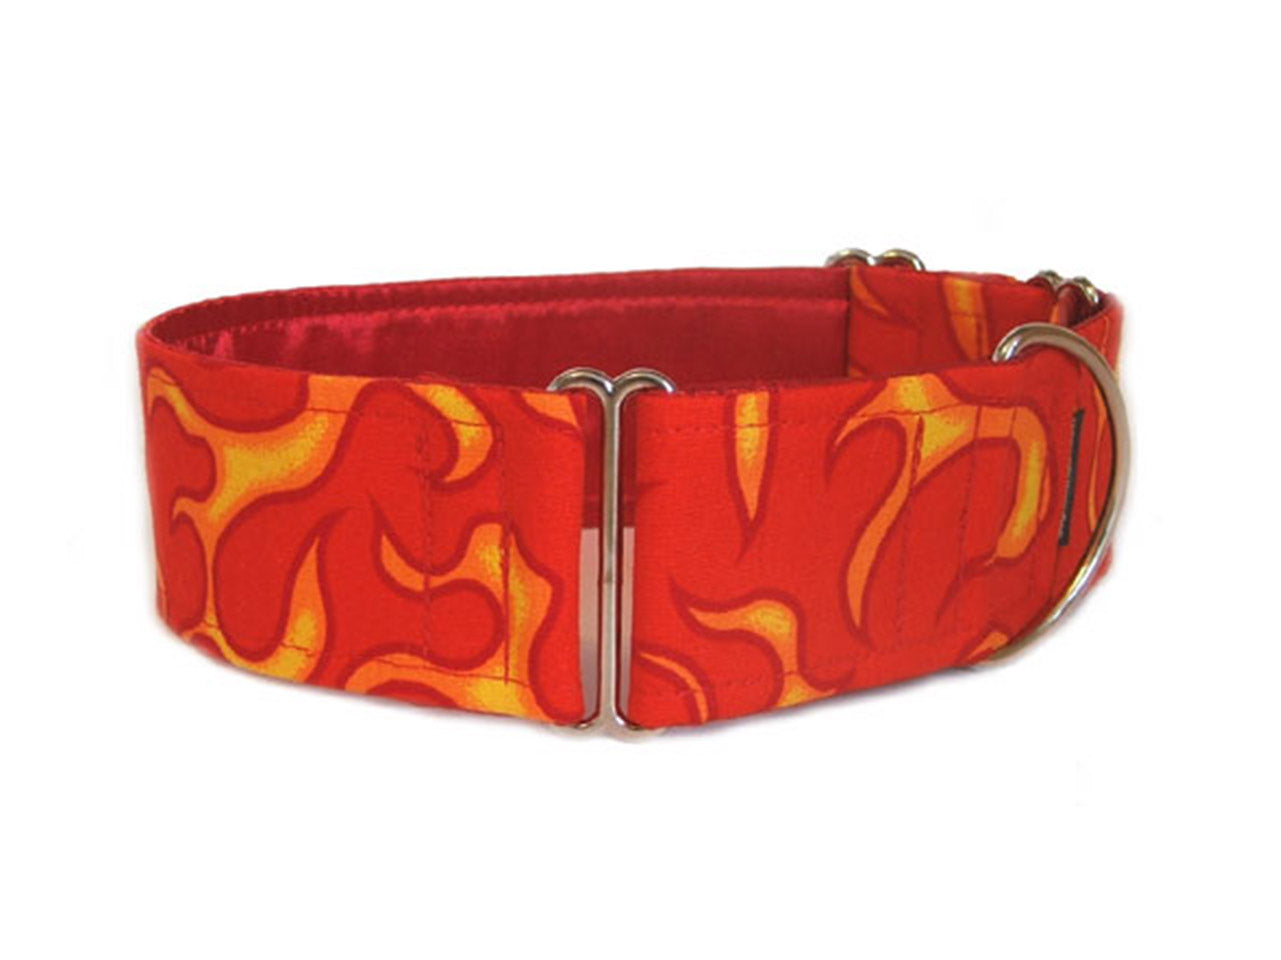 Red-hot dog collar with sizzling red and orange flames.